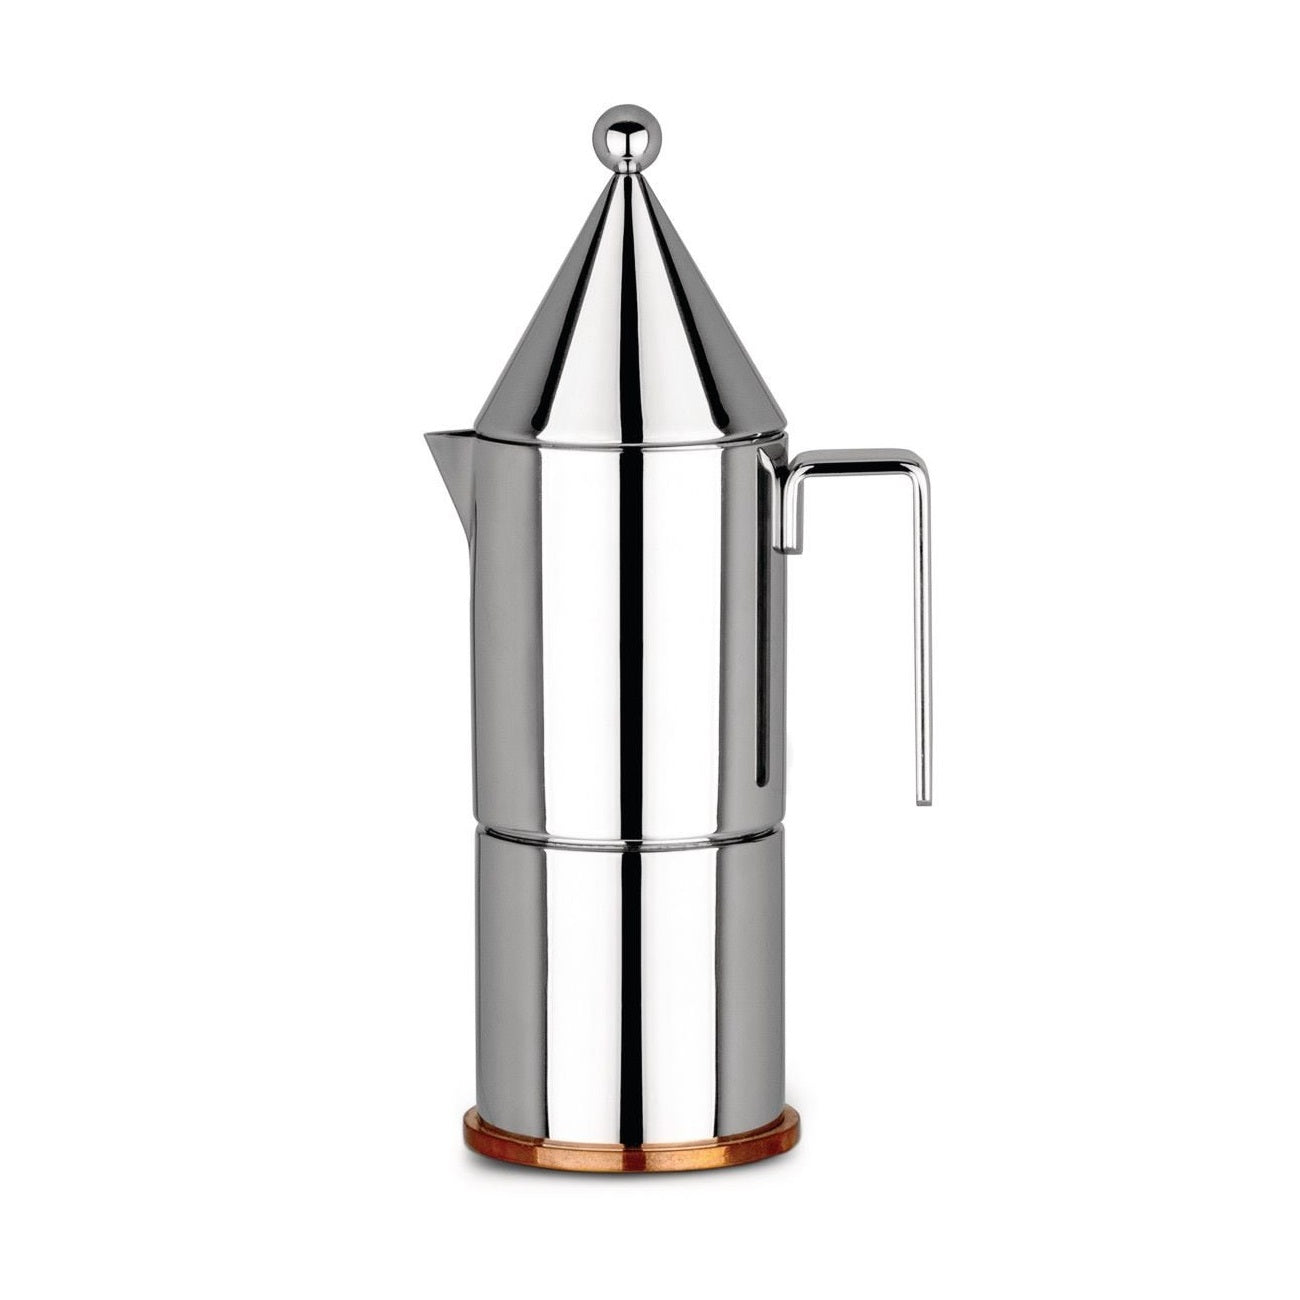 Alessi 9090 Espresso Coffee Maker Perforated Handle - 3 Cups